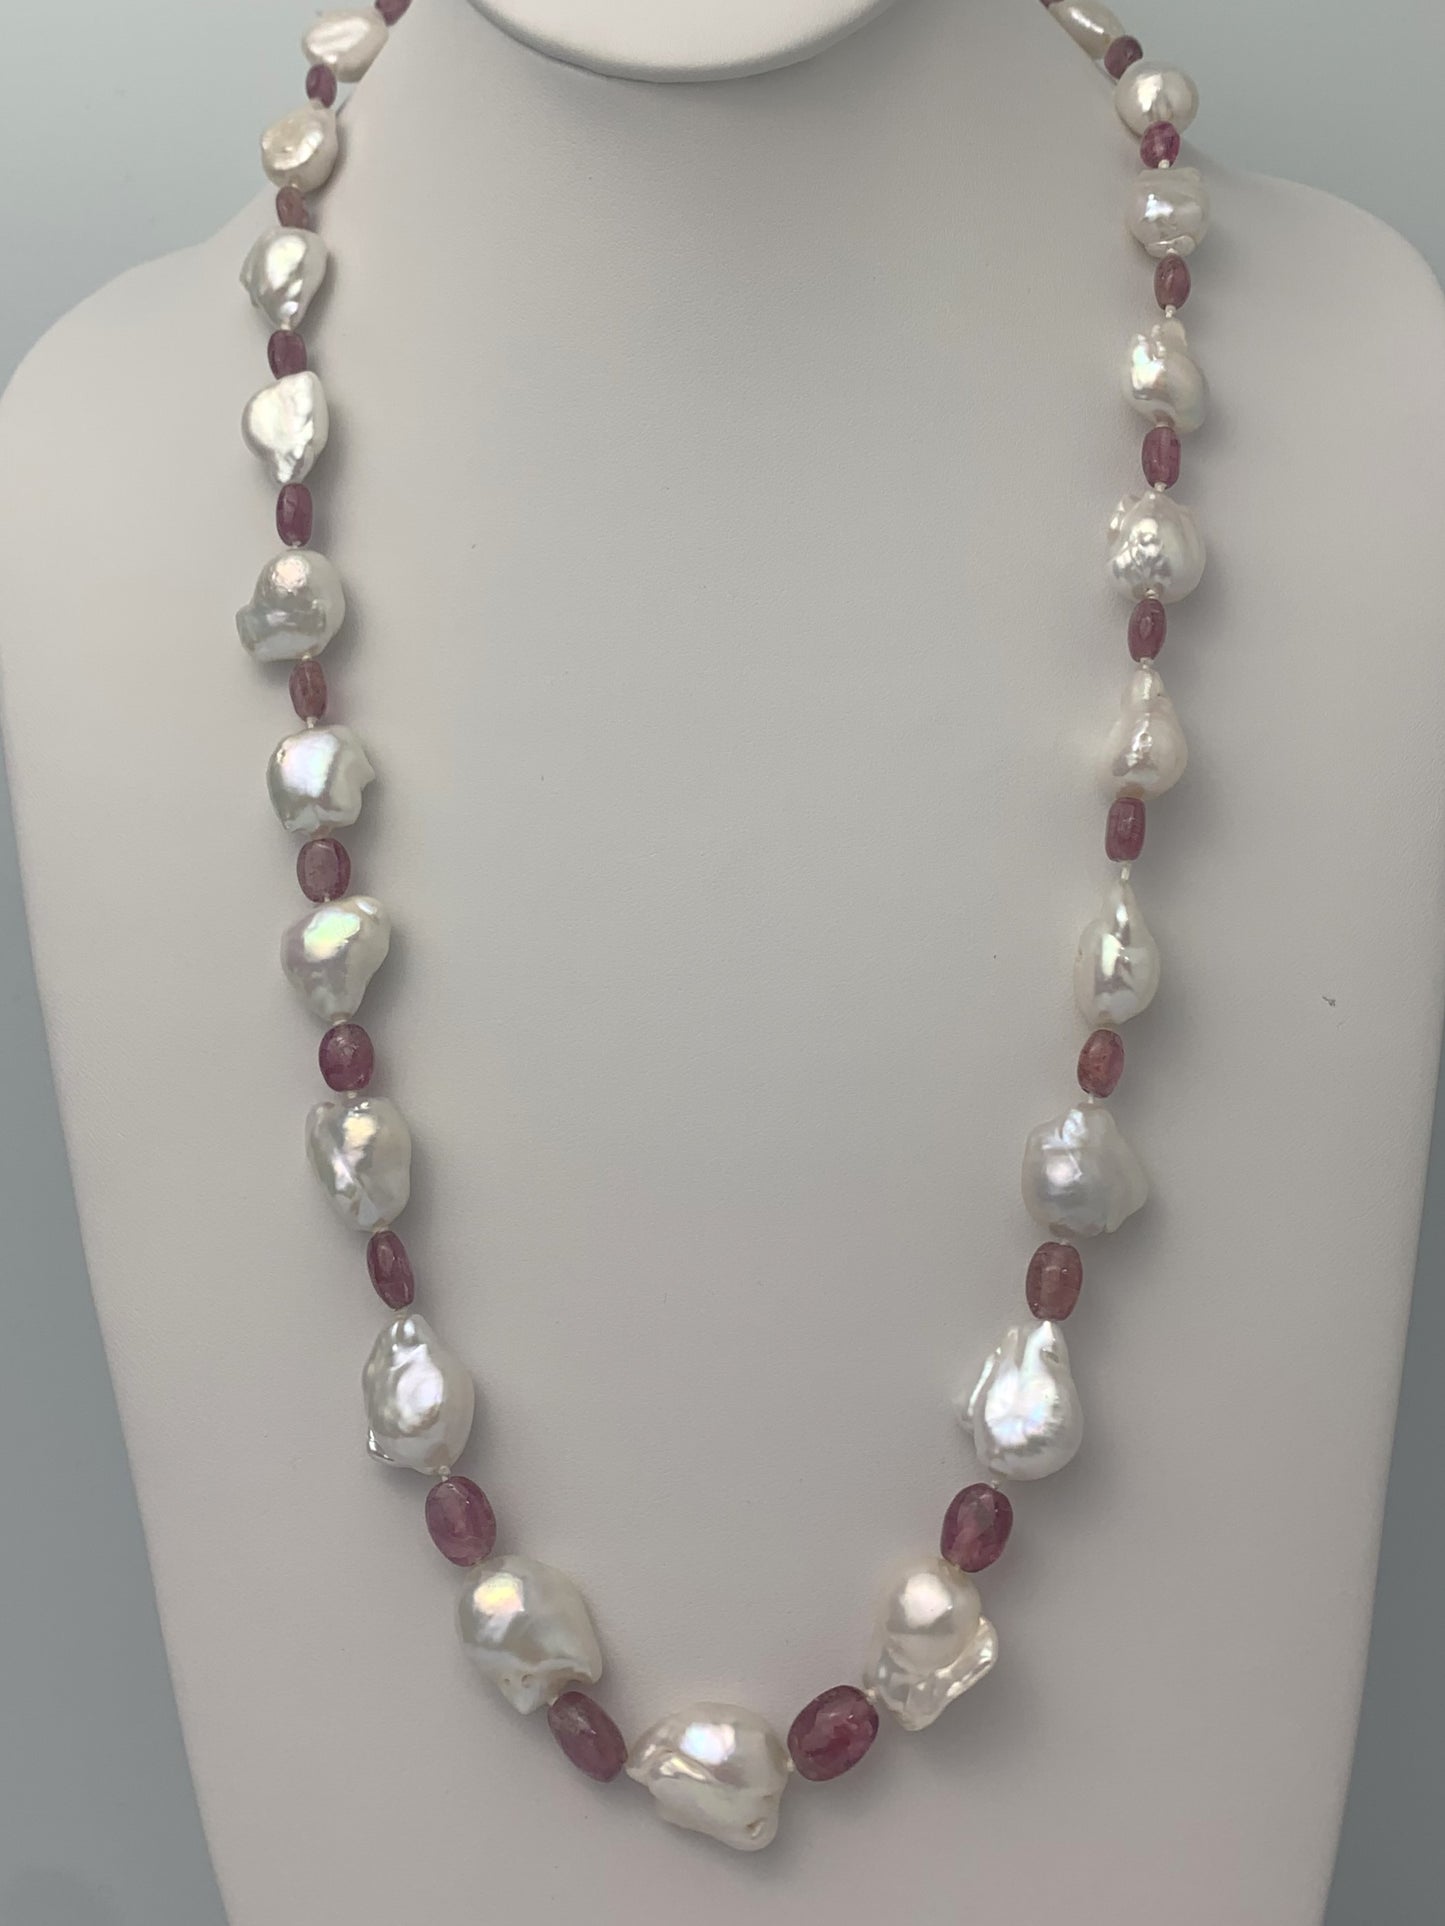 26" Freshwater Baroque Pearl and Pink Tourmaline Necklace with Vermeil Clasp - NCK-089-KNTPRLGMSS-WHPT-26